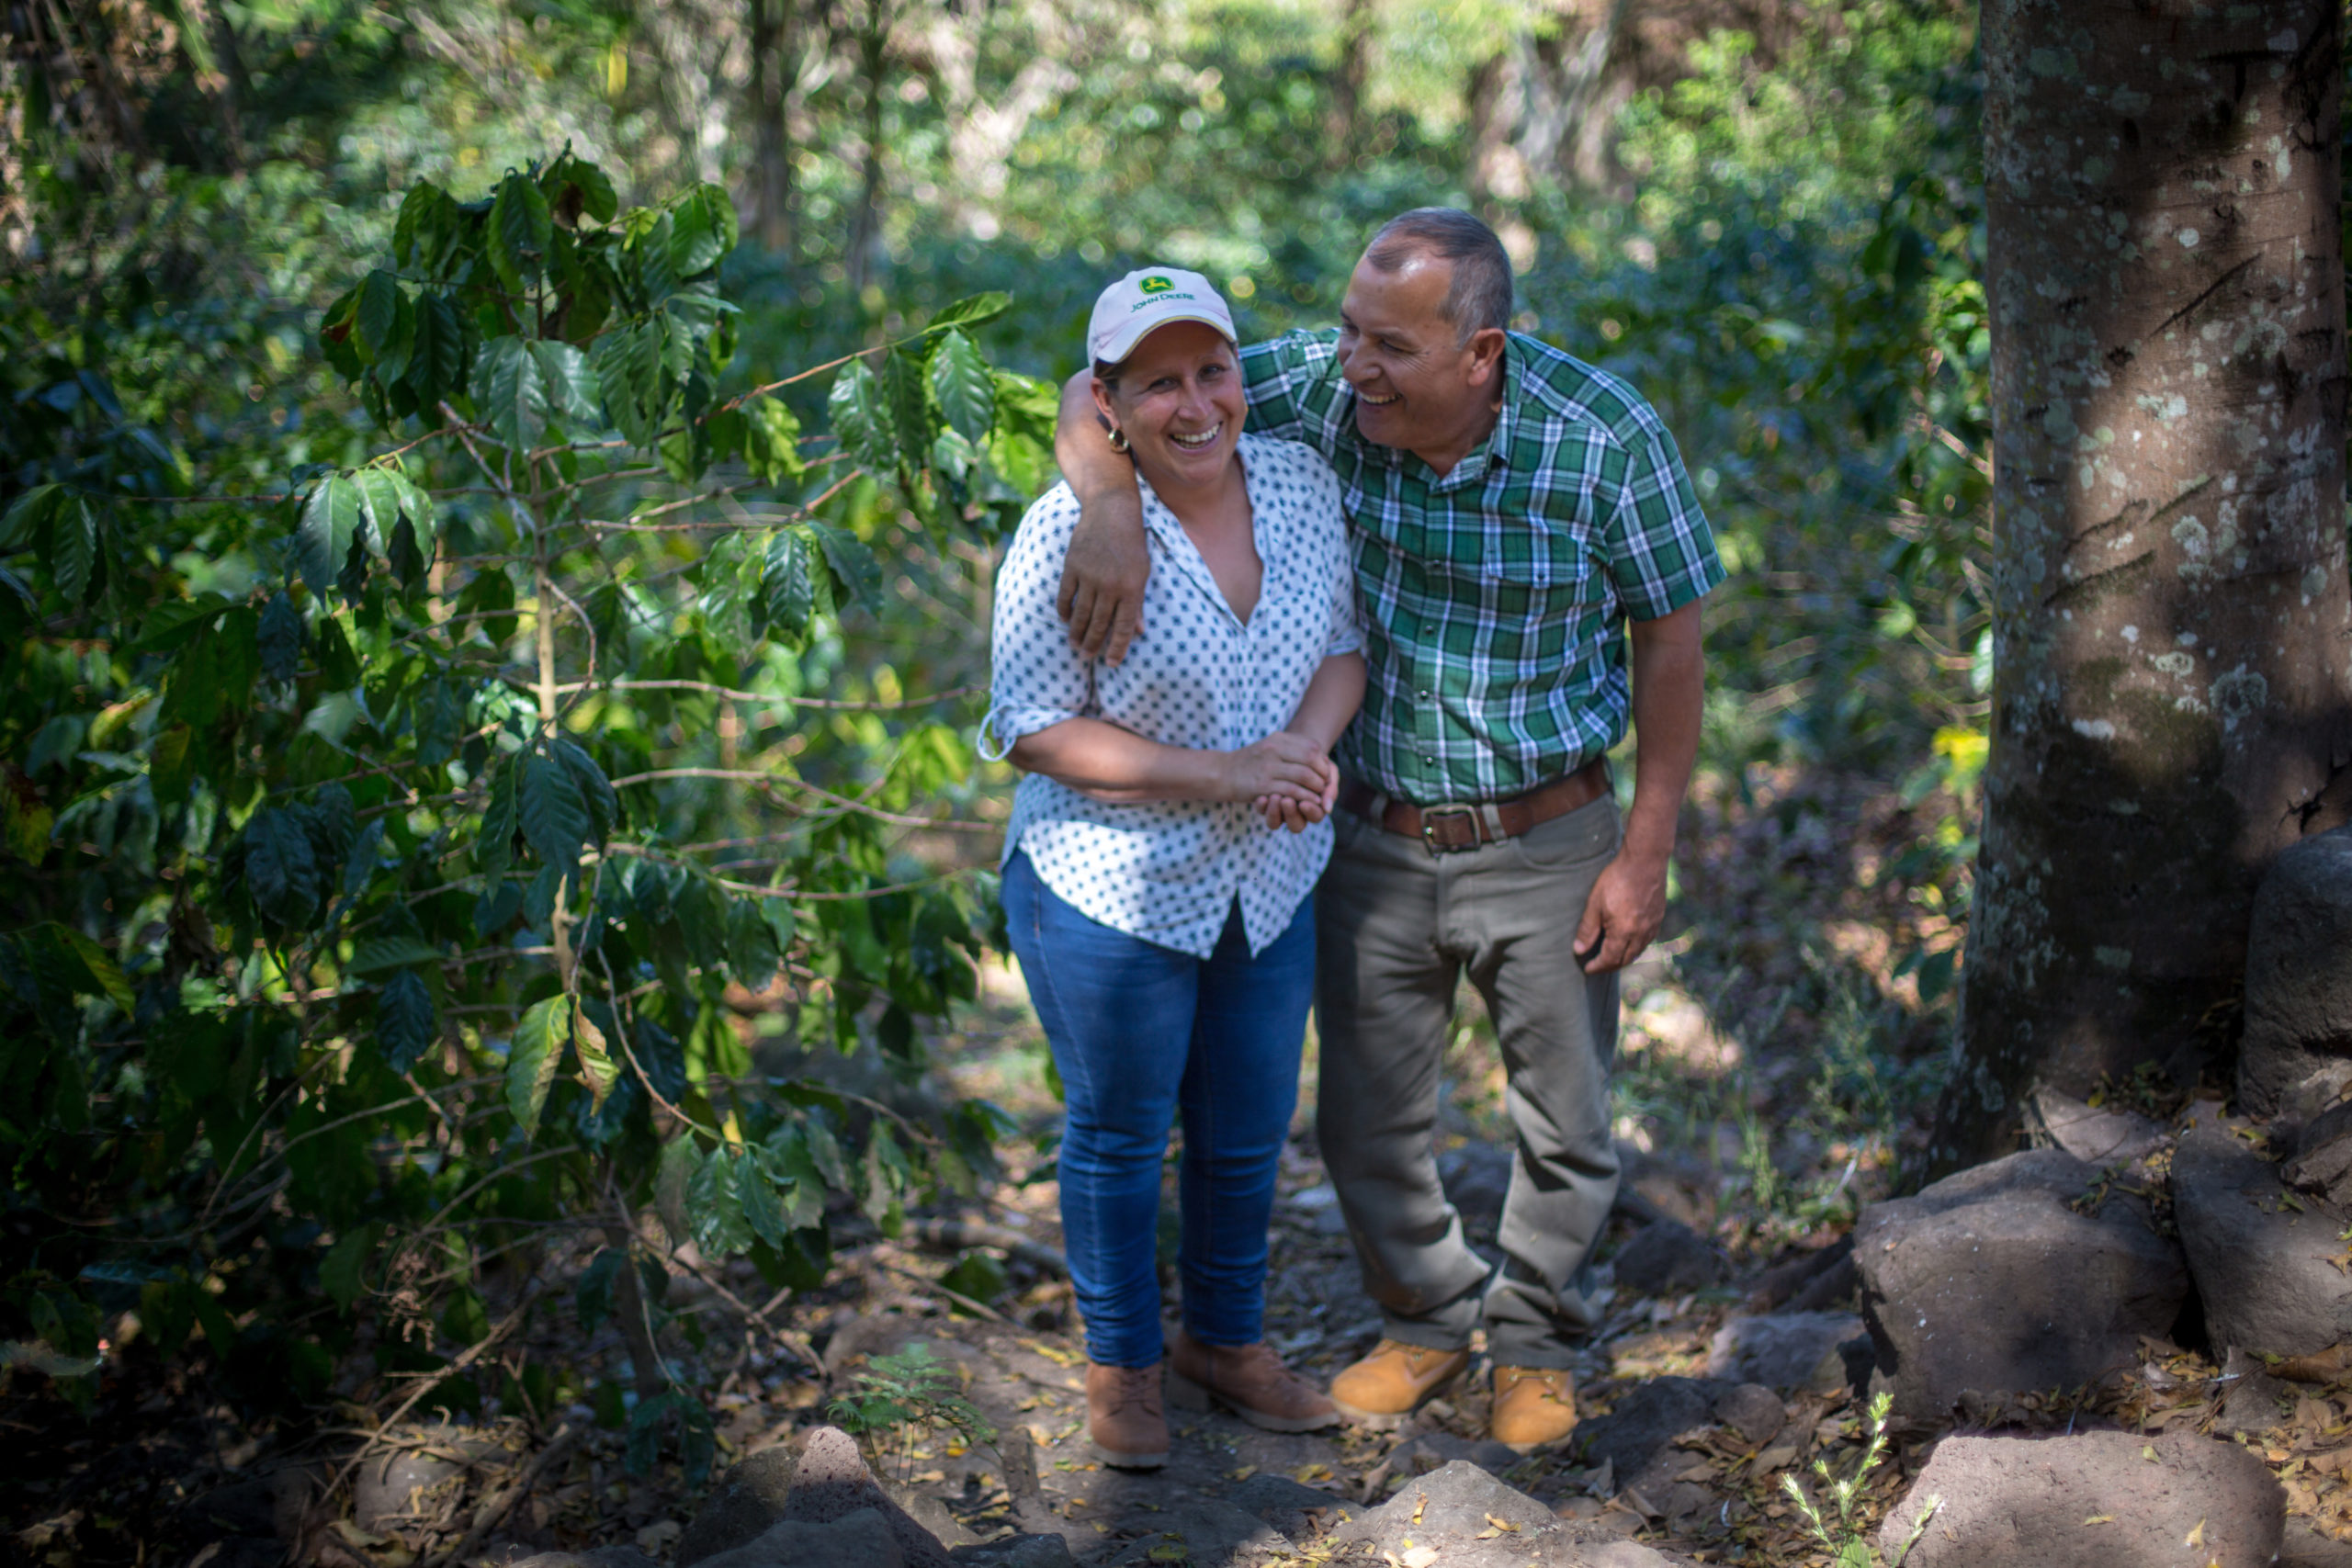 Selenia Vanegas, coffee producer with COMSA cooperative in Santiago Puringla, La Paz. Selenia was a migrant and lived in the New York working for six years.